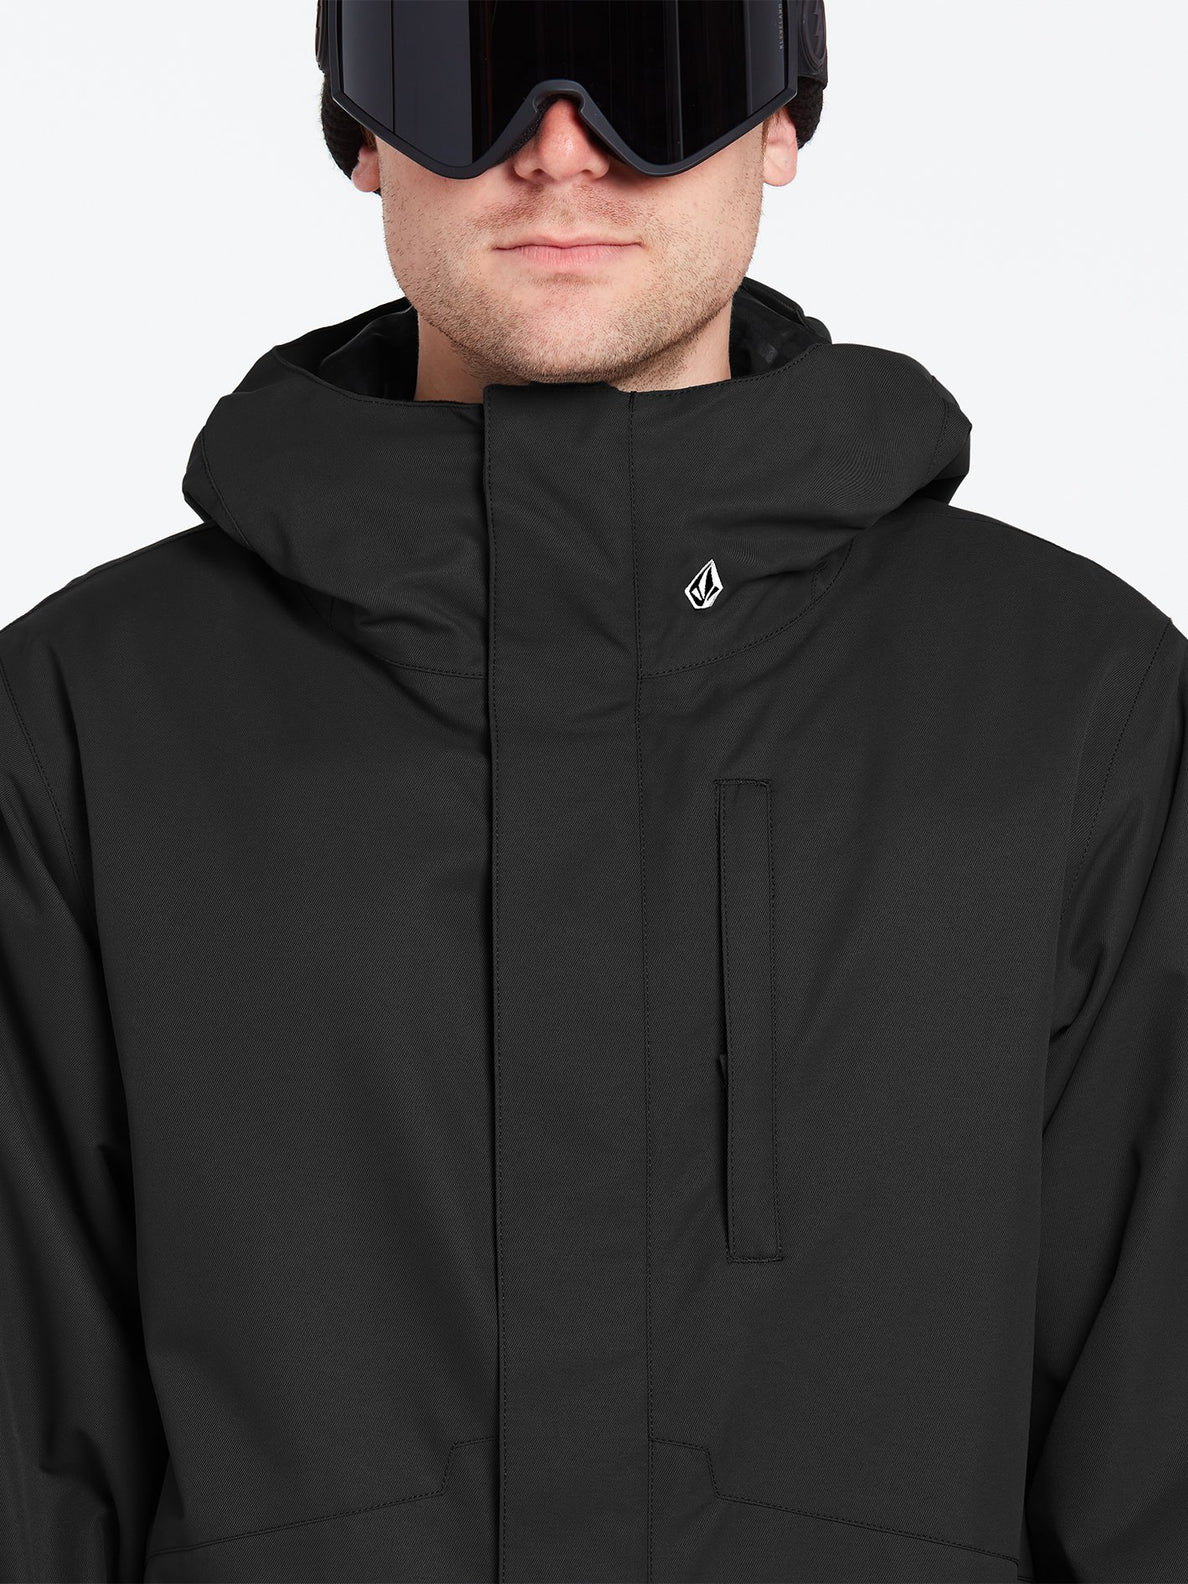 17Forty Insulated Jacket - BLACK (G0452114_BLK) [55]